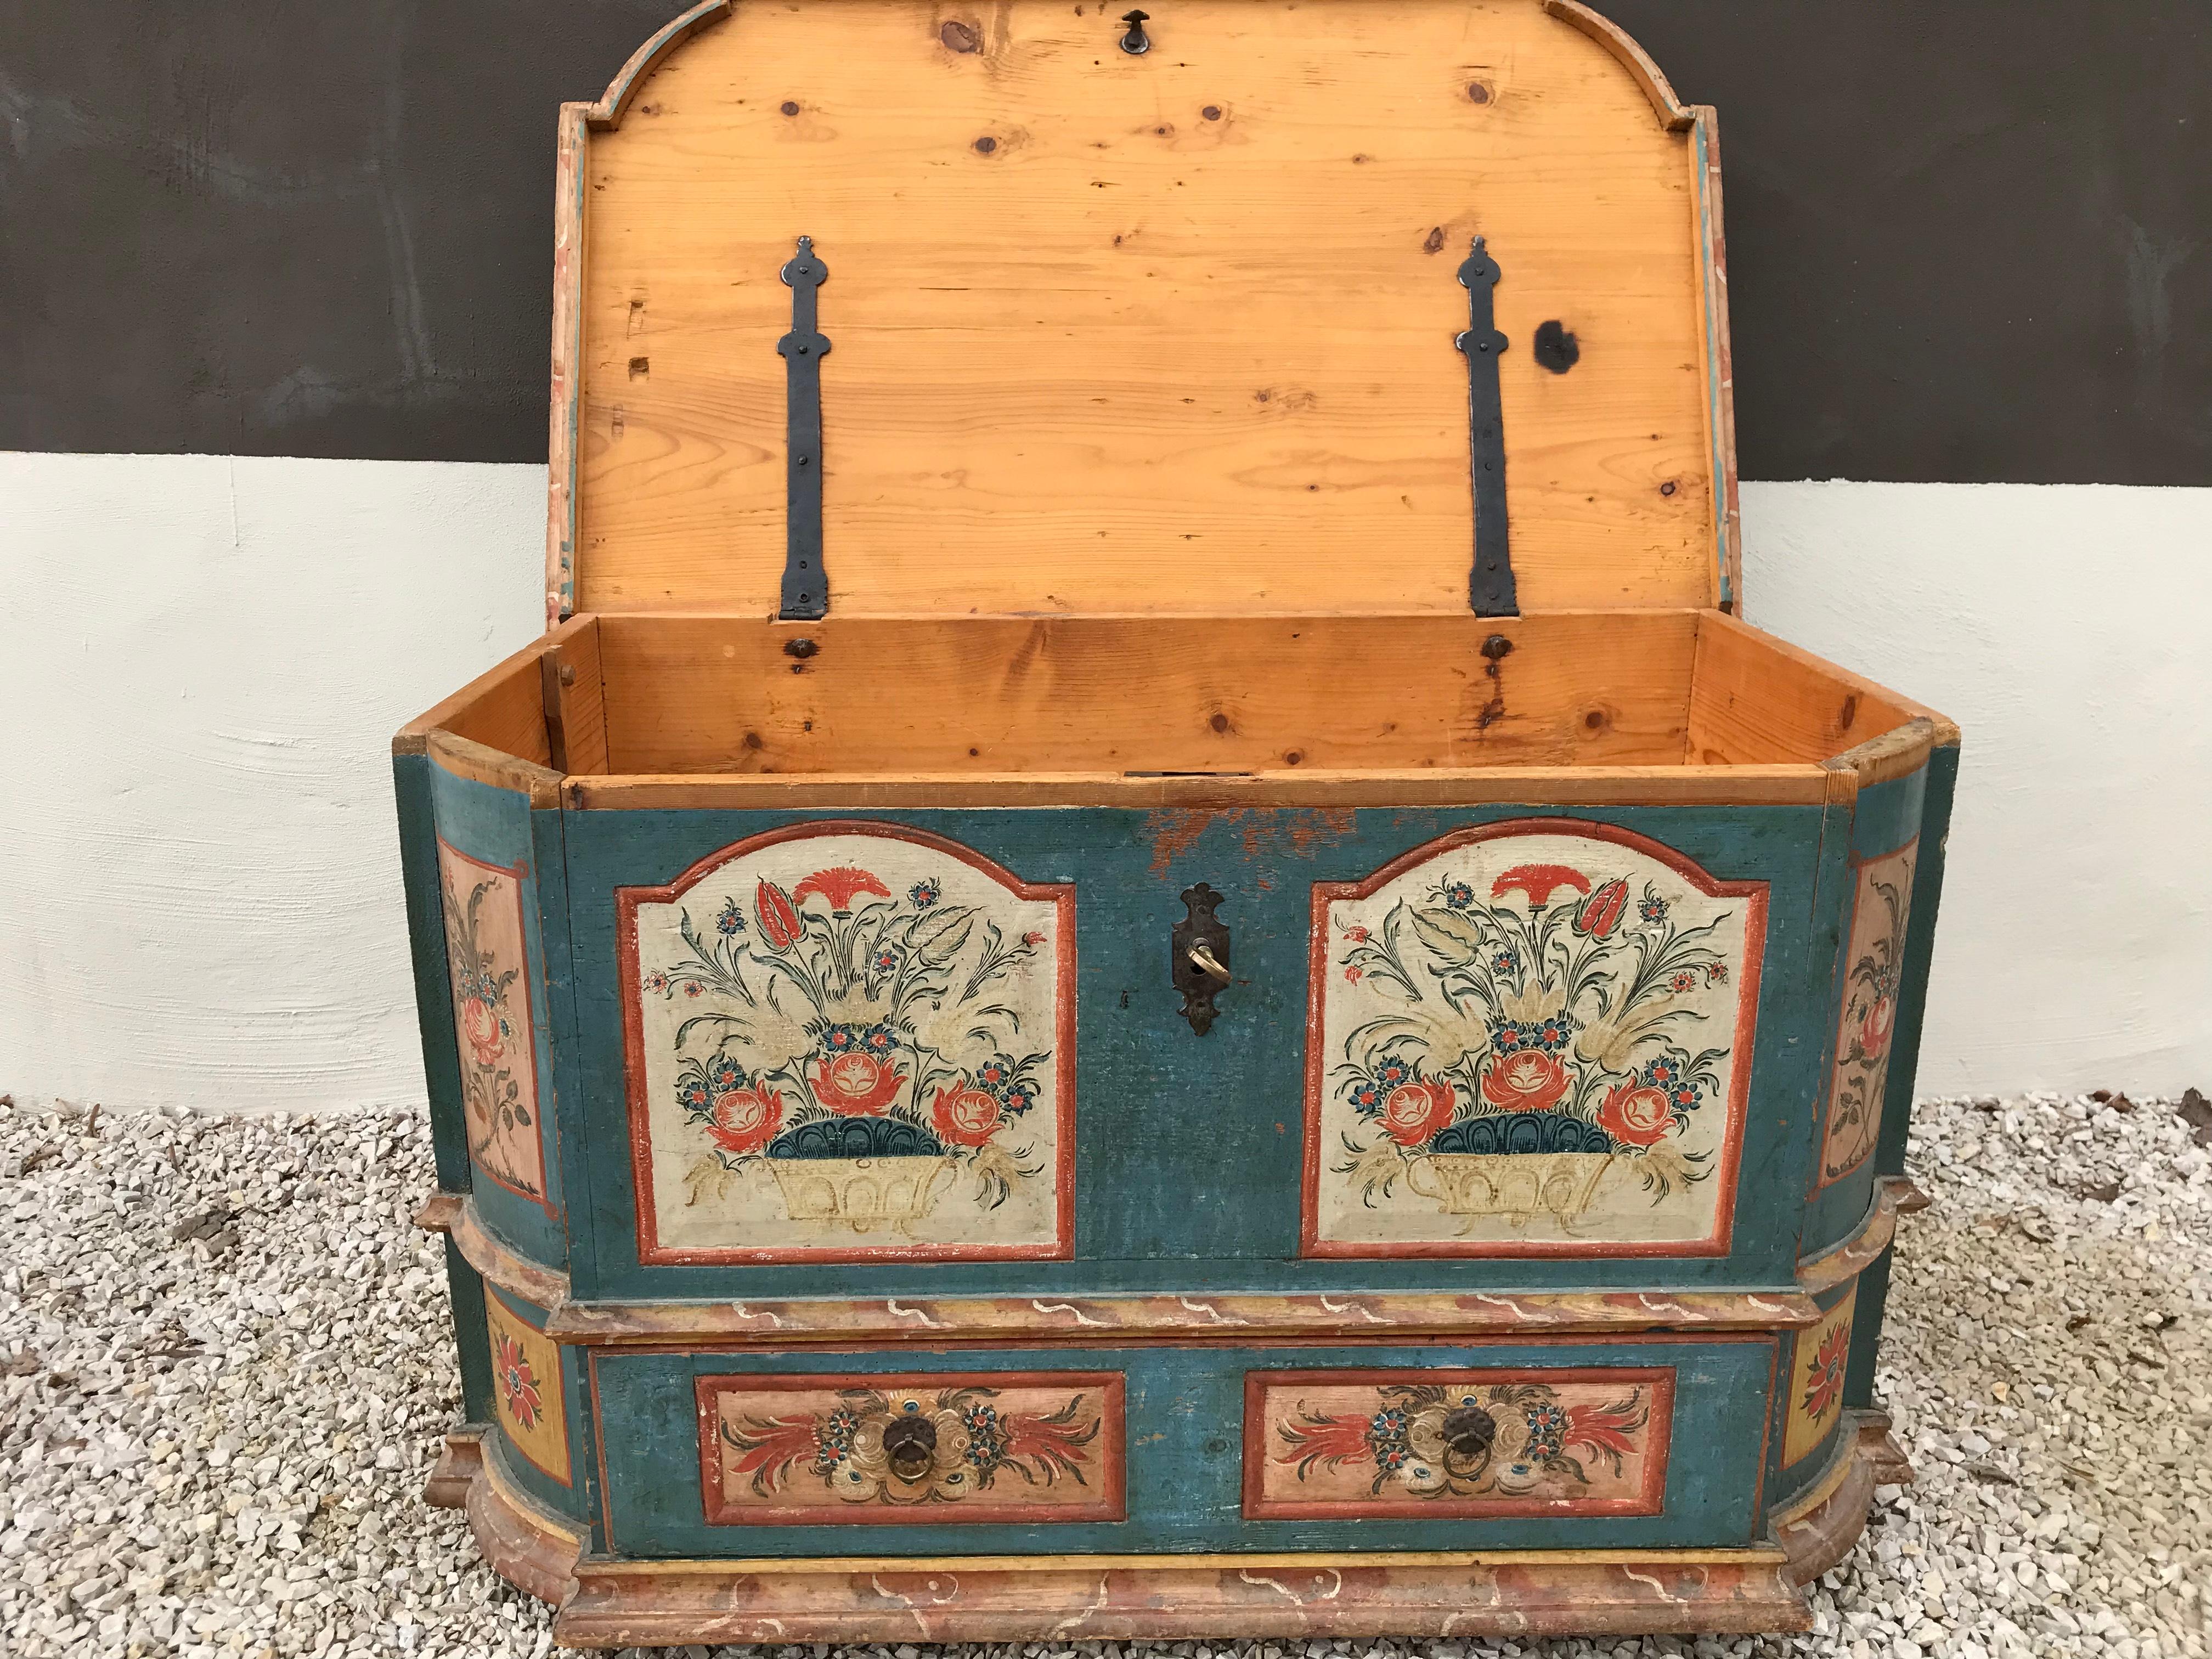 This painted chest comes from the Czech republic,
year 1818.